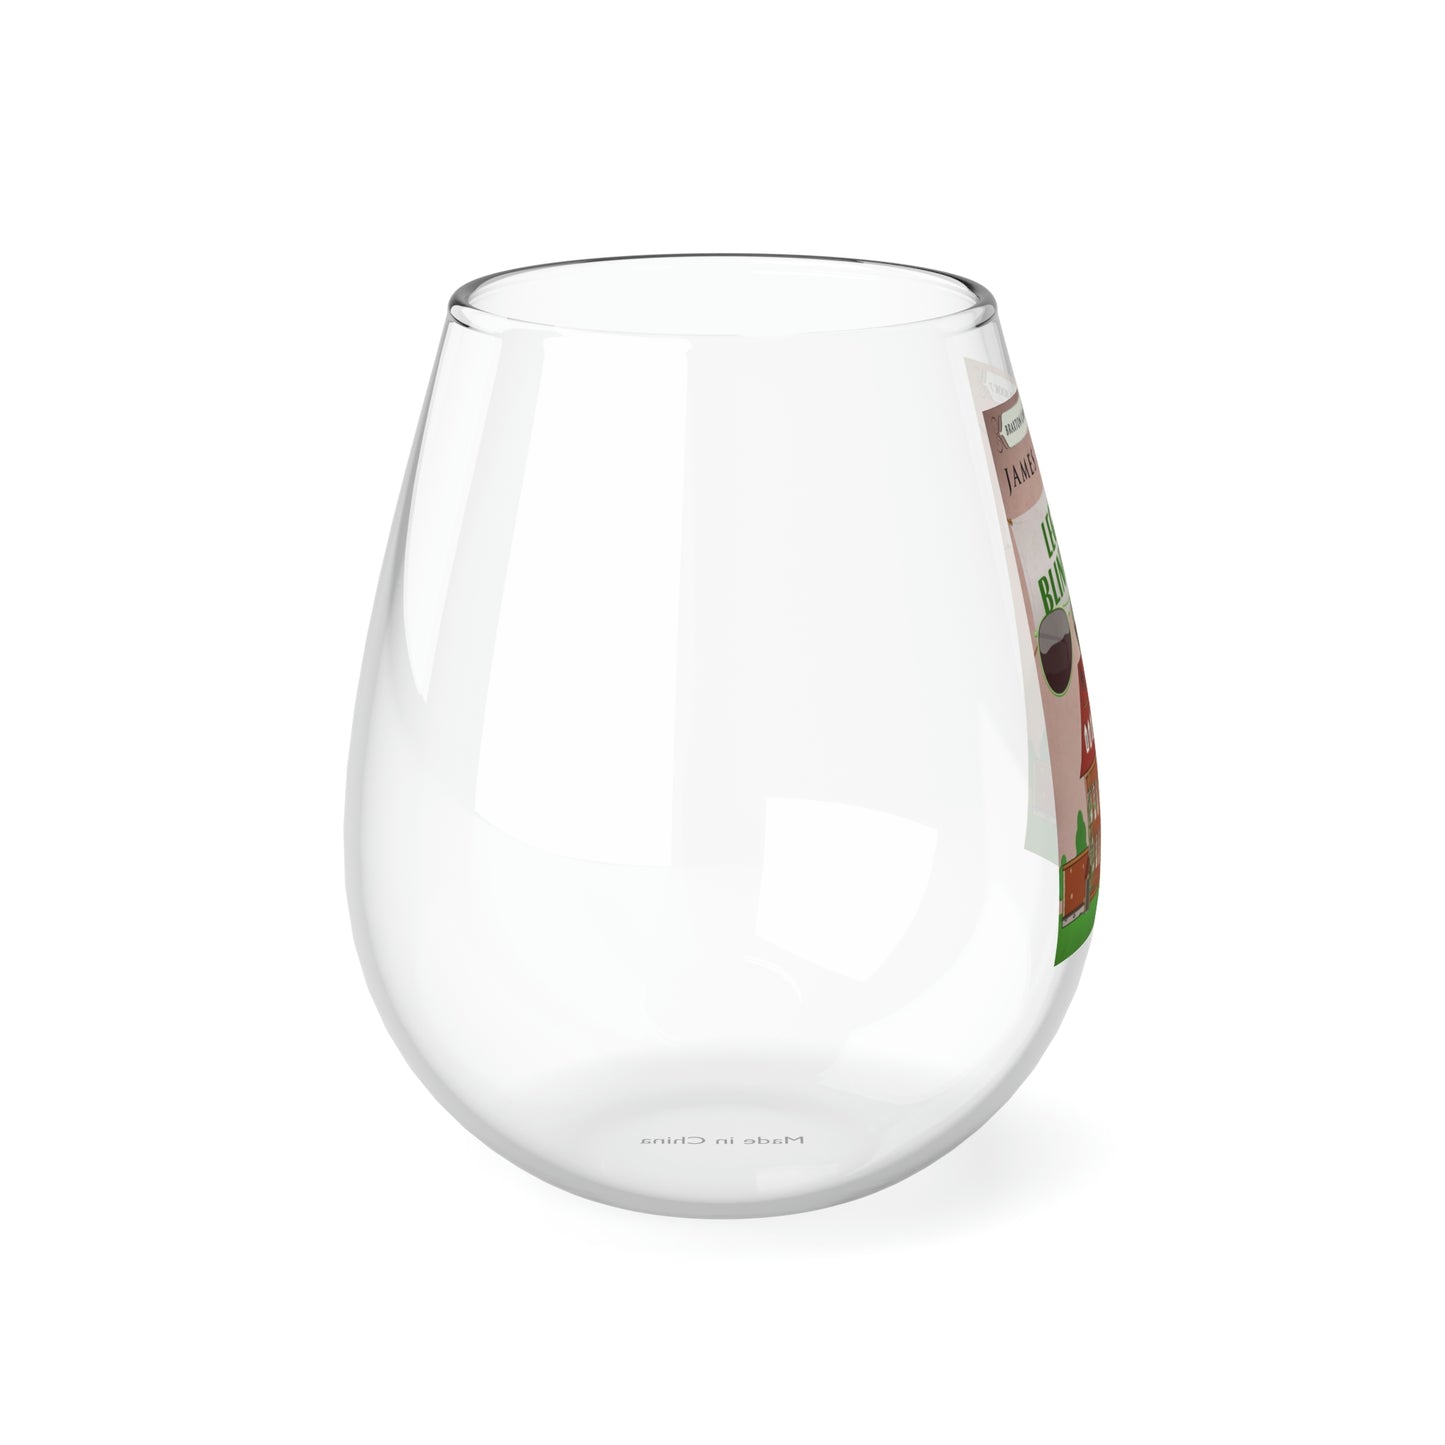 Legally Blind Luck - Stemless Wine Glass, 11.75oz